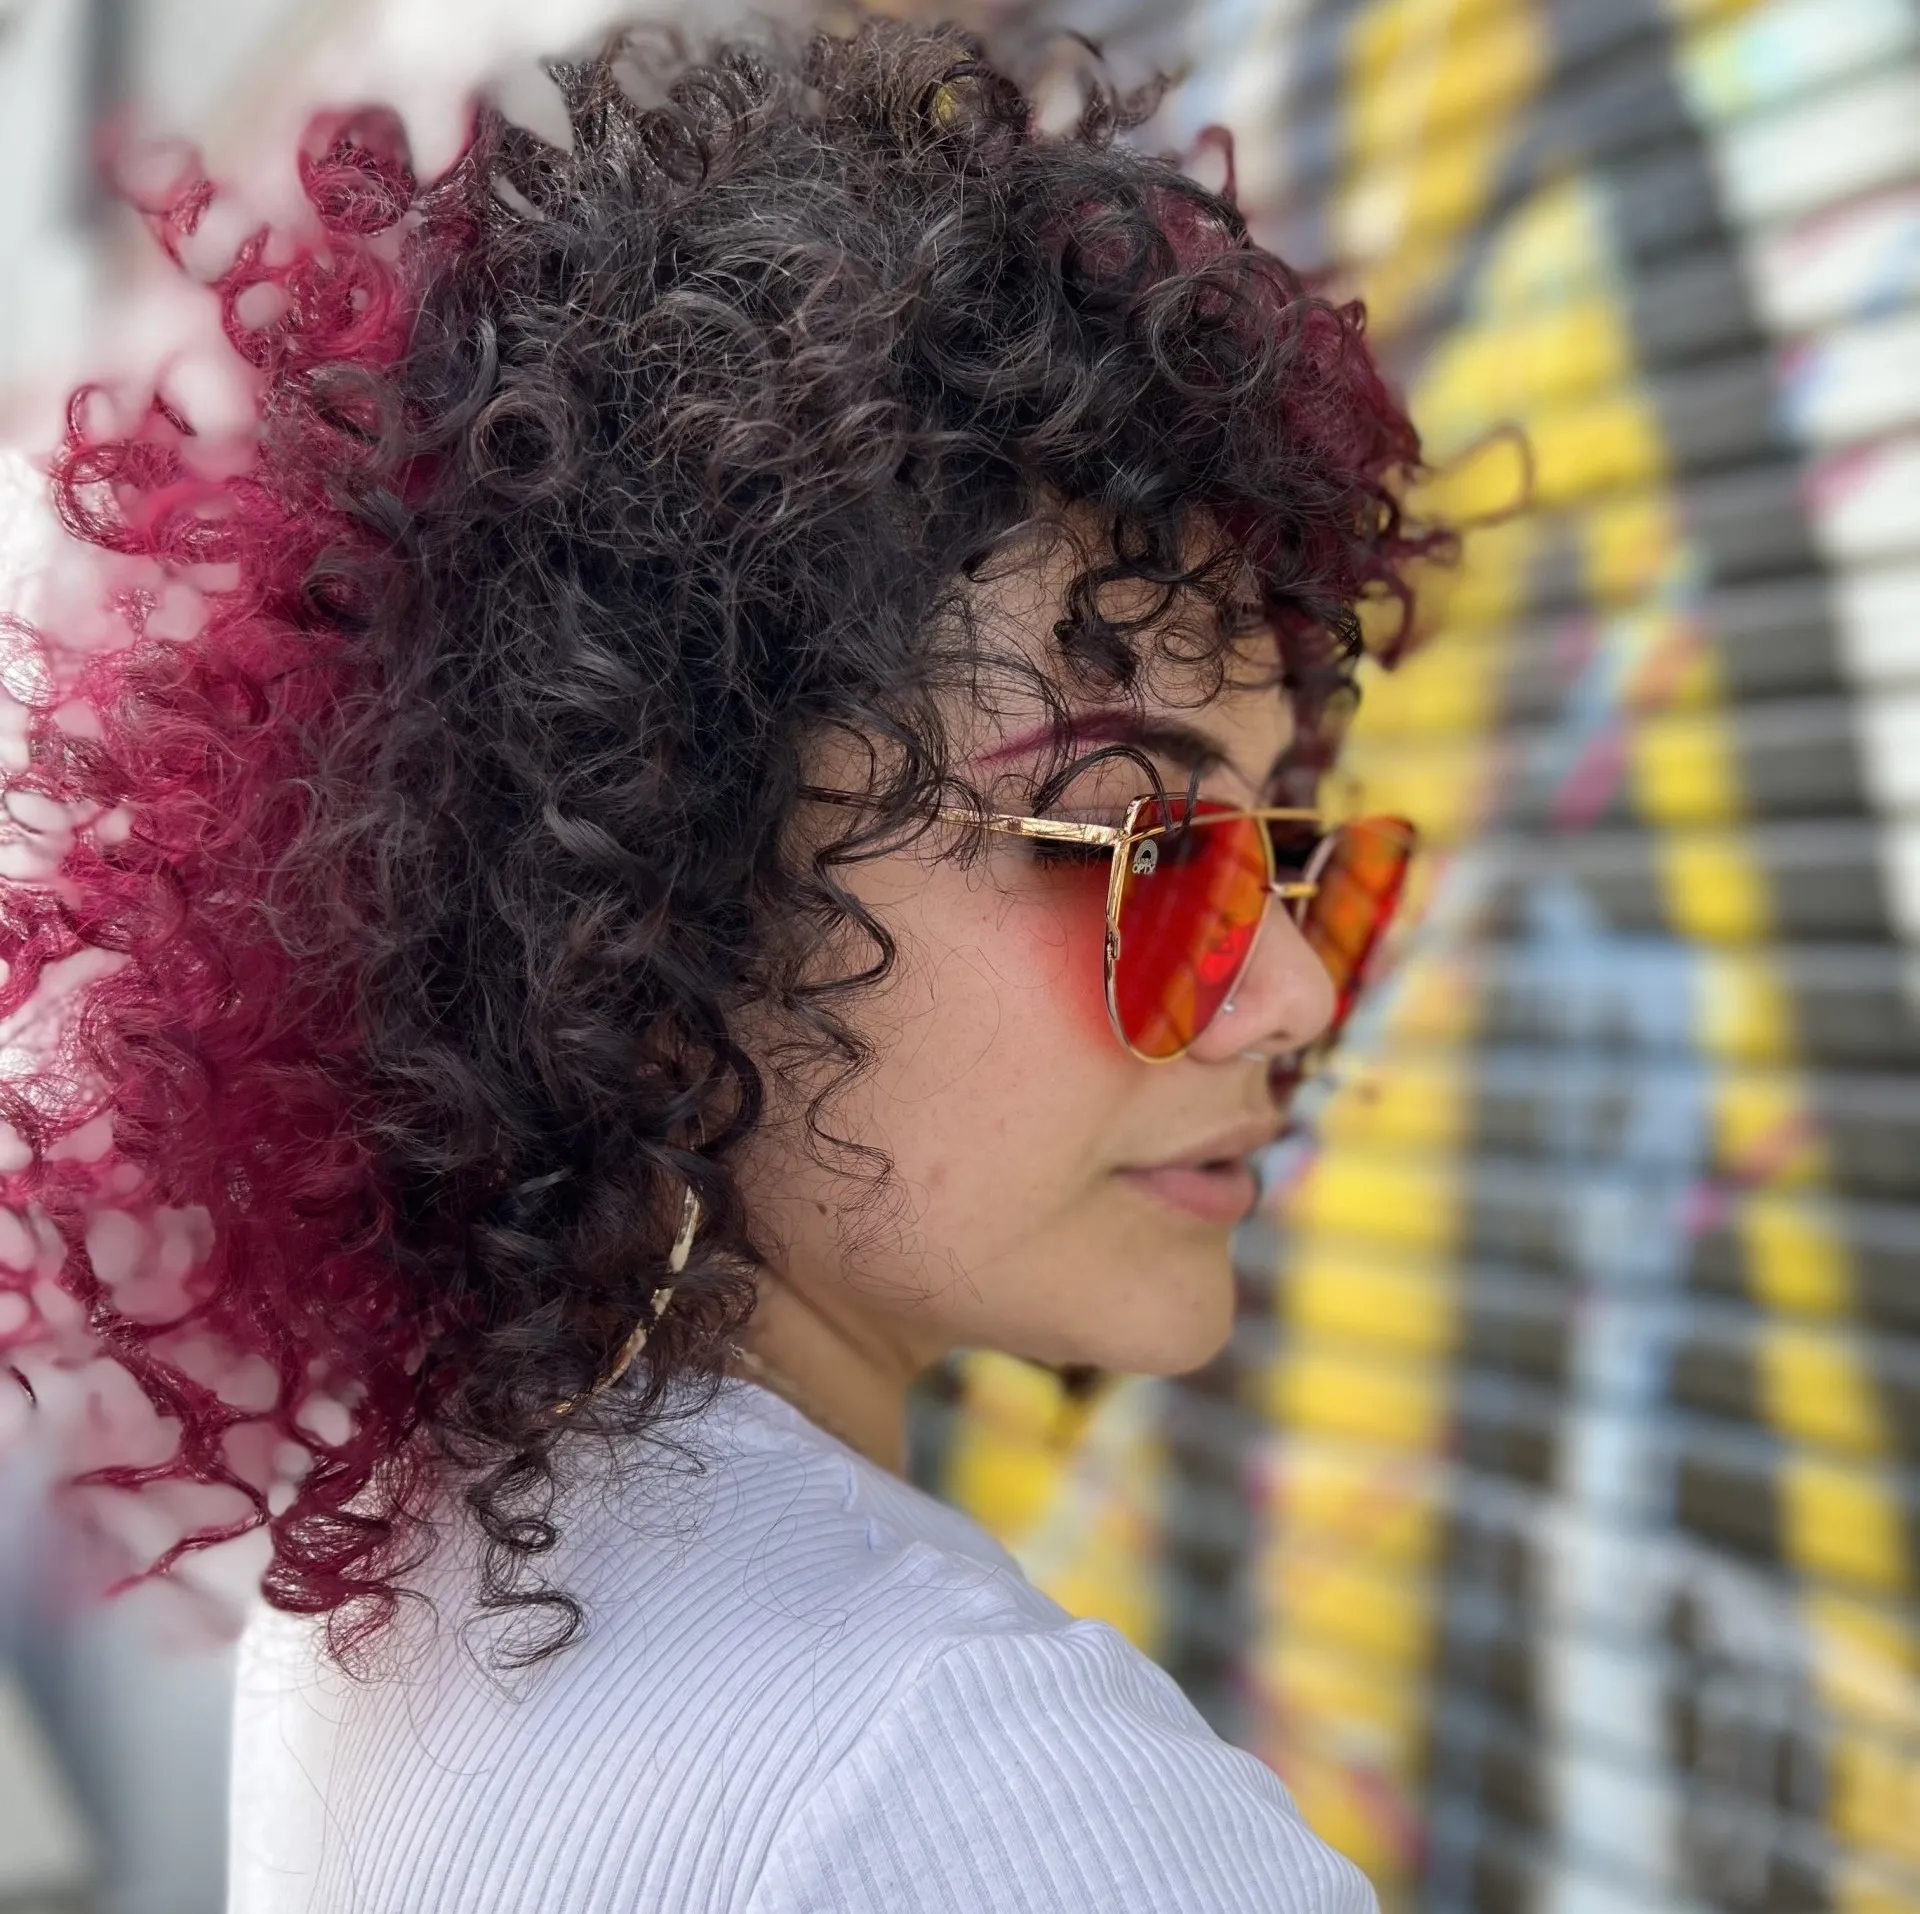 A woman with curly hair and sunglasses is standing in front of a graffiti wall.